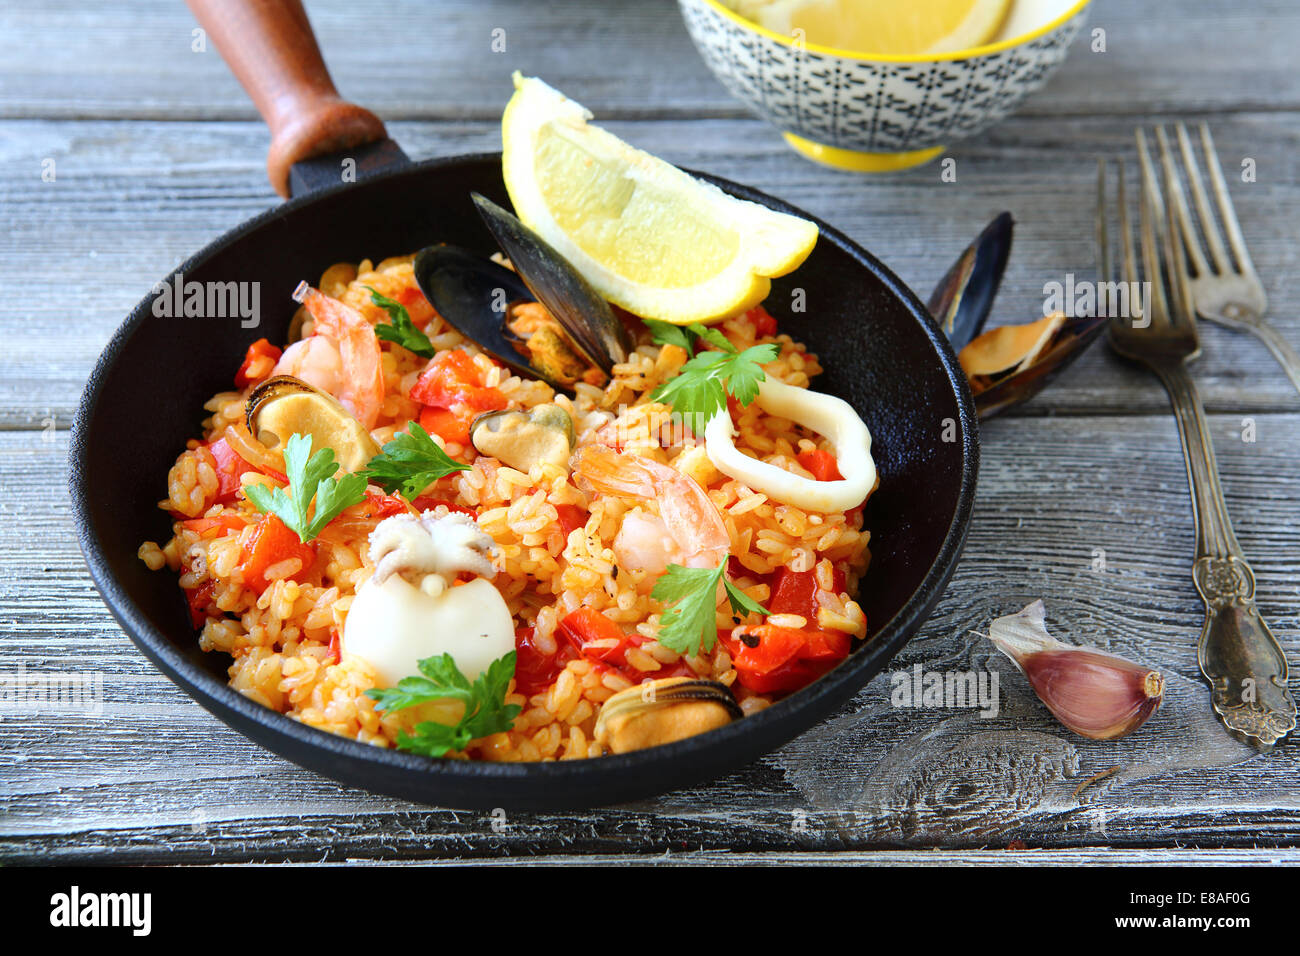 Paella with rice and seafood, delicious food Stock Photo